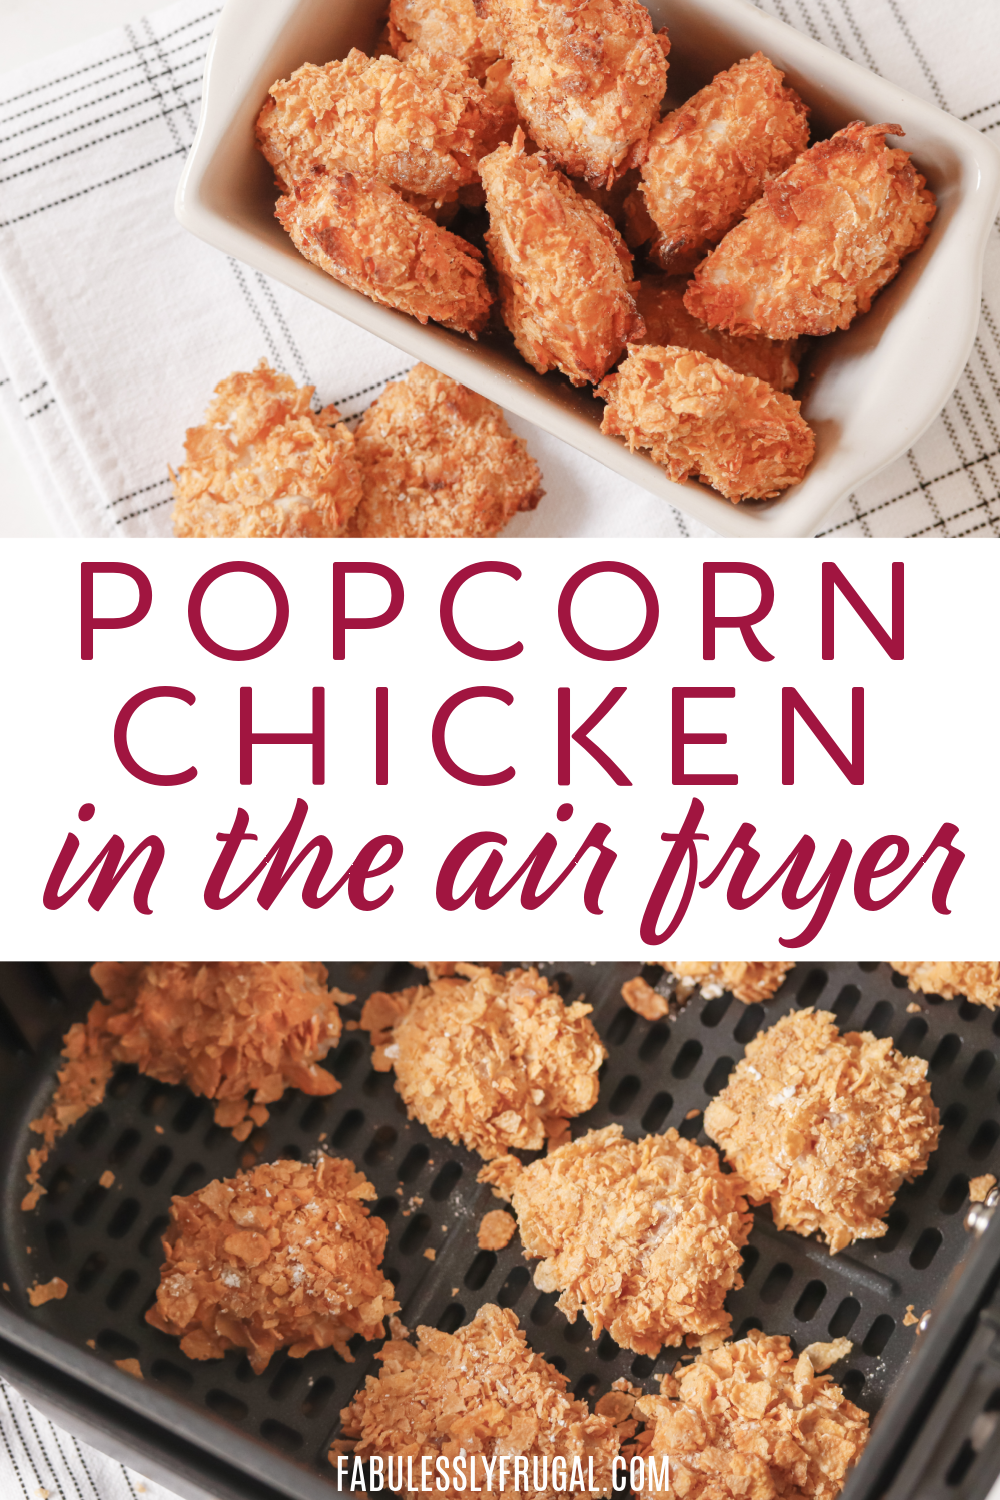 How to make popcorn chicken in the air fryer- well, it's simple and only takes 20 minutes!